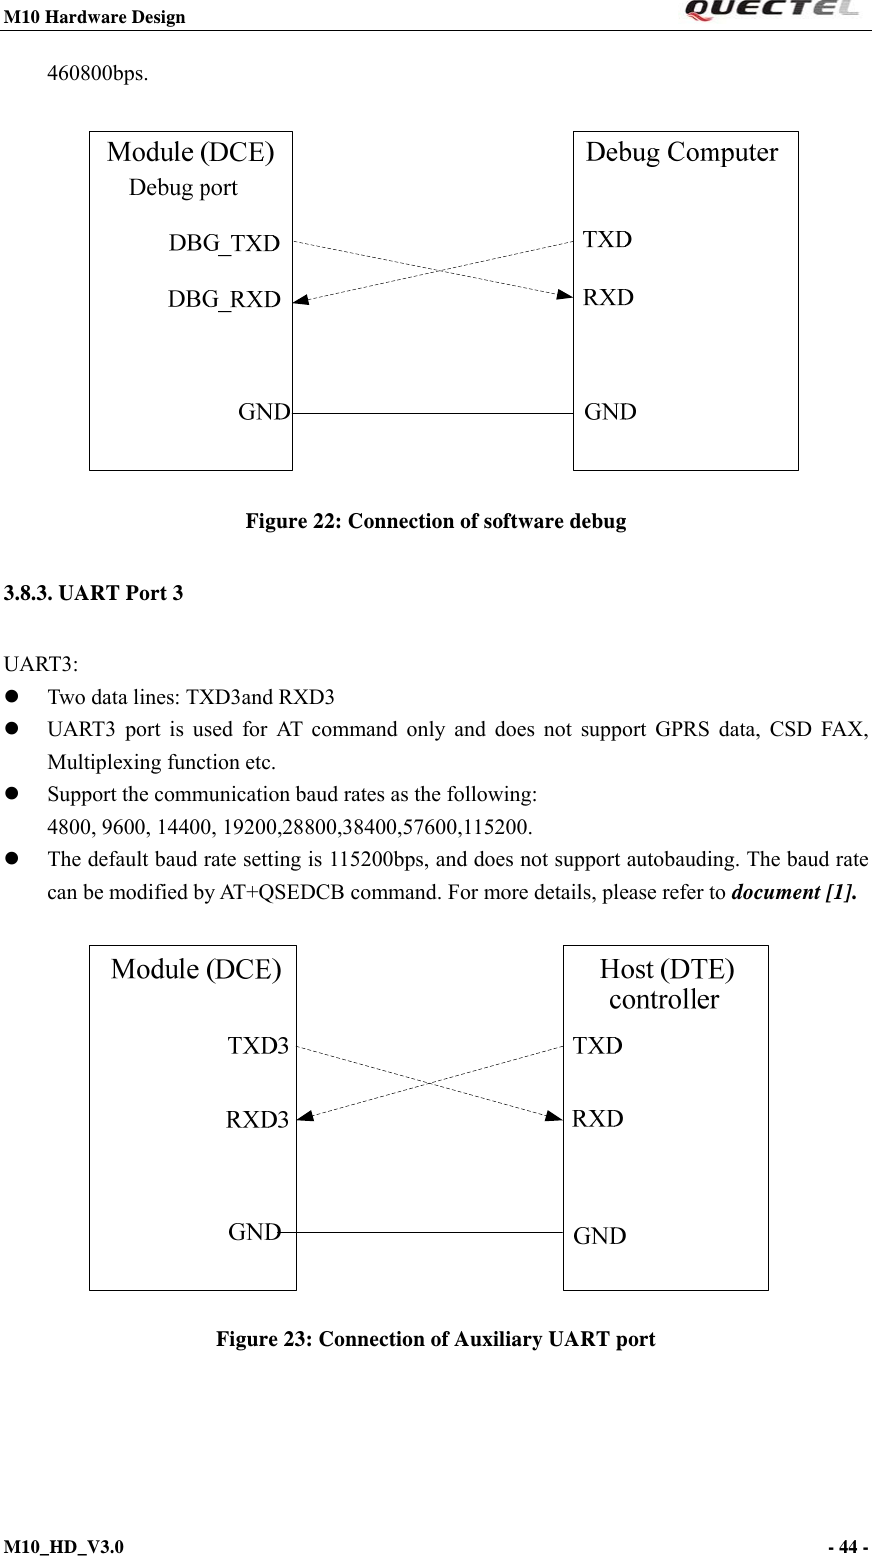 M10 Hardware Design                                                                 M10_HD_V3.0                                                                      - 44 -  460800bps.    Figure 22: Connection of software debug3.8.3. UART Port 3 UART3:  Two data lines: TXD3and RXD3  UART3 port is used for AT command only and does not support GPRS data, CSD FAX, Multiplexing function etc.    Support the communication baud rates as the following: 4800, 9600, 14400, 19200,28800,38400,57600,115200.  The default baud rate setting is 115200bps, and does not support autobauding. The baud rate can be modified by AT+QSEDCB command. For more details, please refer to document [1].   Figure 23: Connection of Auxiliary UART port   